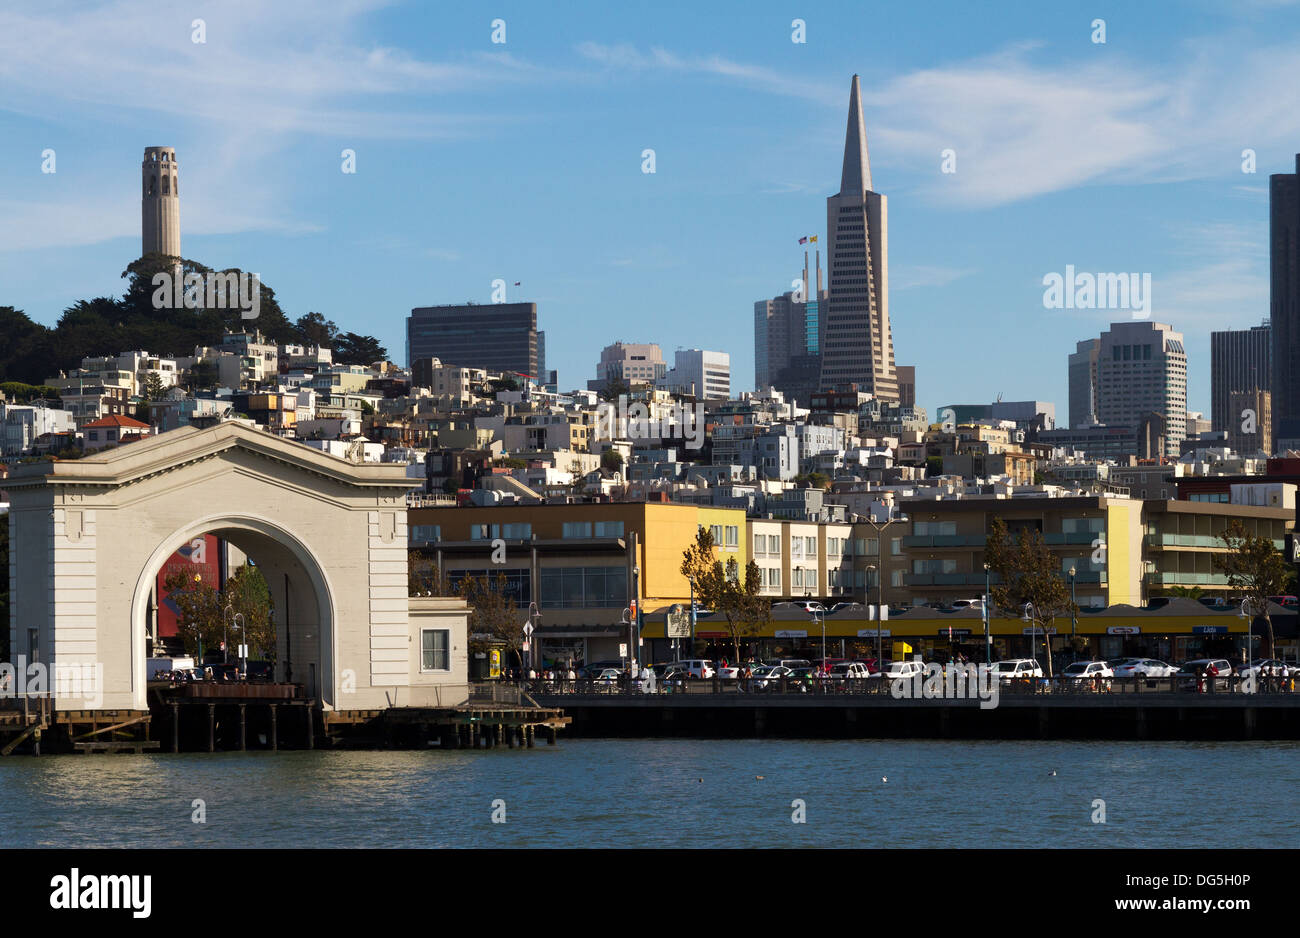 A view of the San Francisco skyline showing Coit Tower and the Transamerica pyramid as seen from the bay. Stock Photo